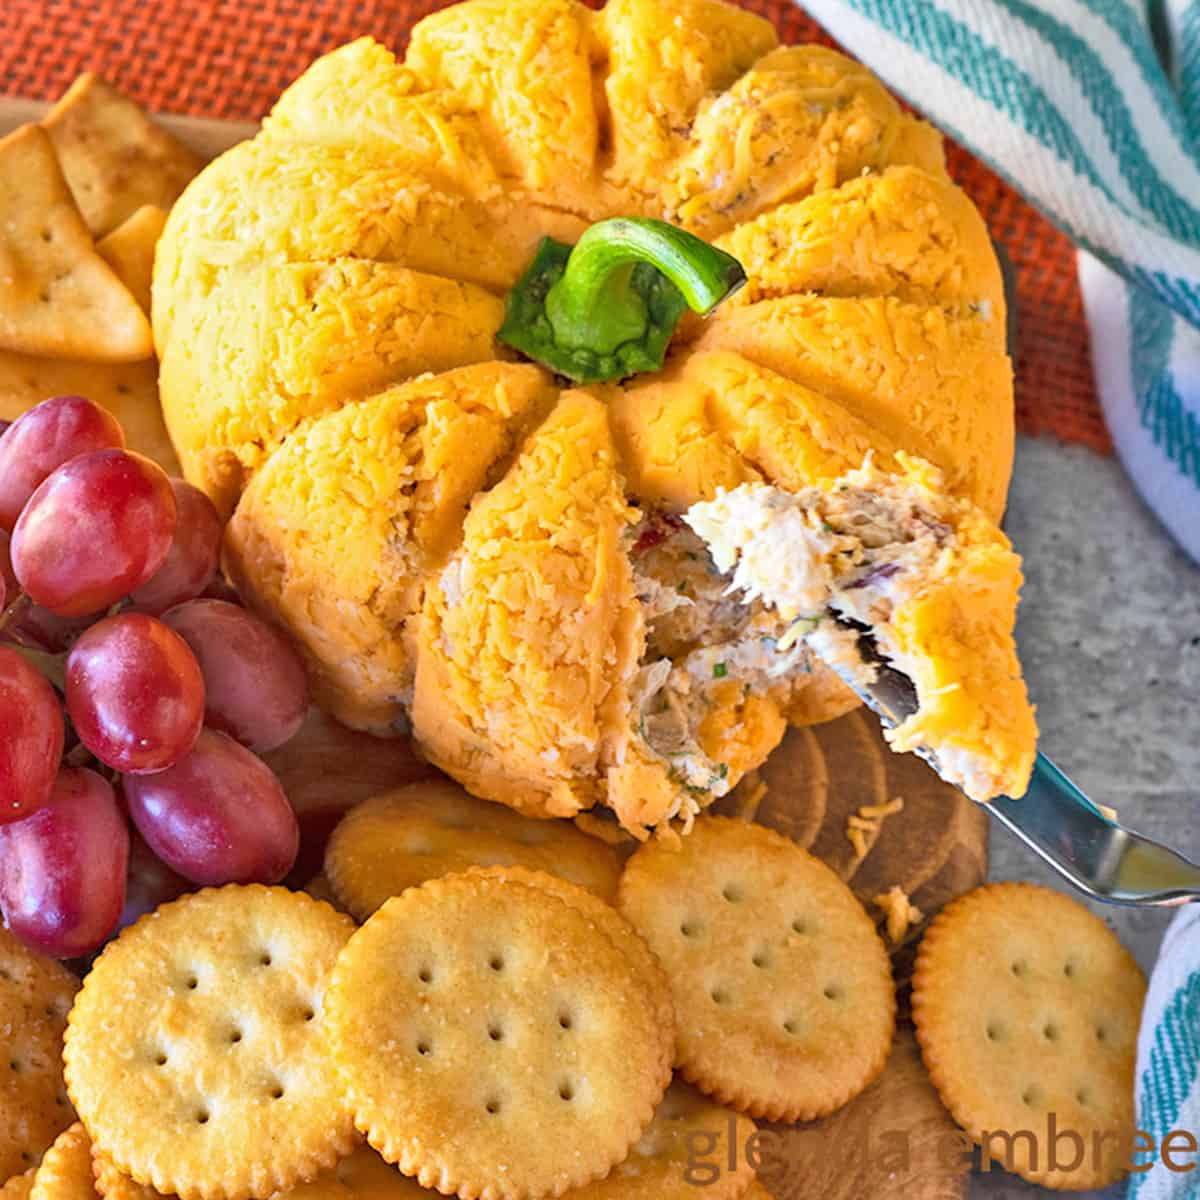 Bacon Pineapple cheeseball on a wooden cutting board with an assortment of crackers and fresh red grapes. Cheeseball is molded into the shape of a pumpkin. Blop of cheese spread is lifted on the end of a cheese spreader.